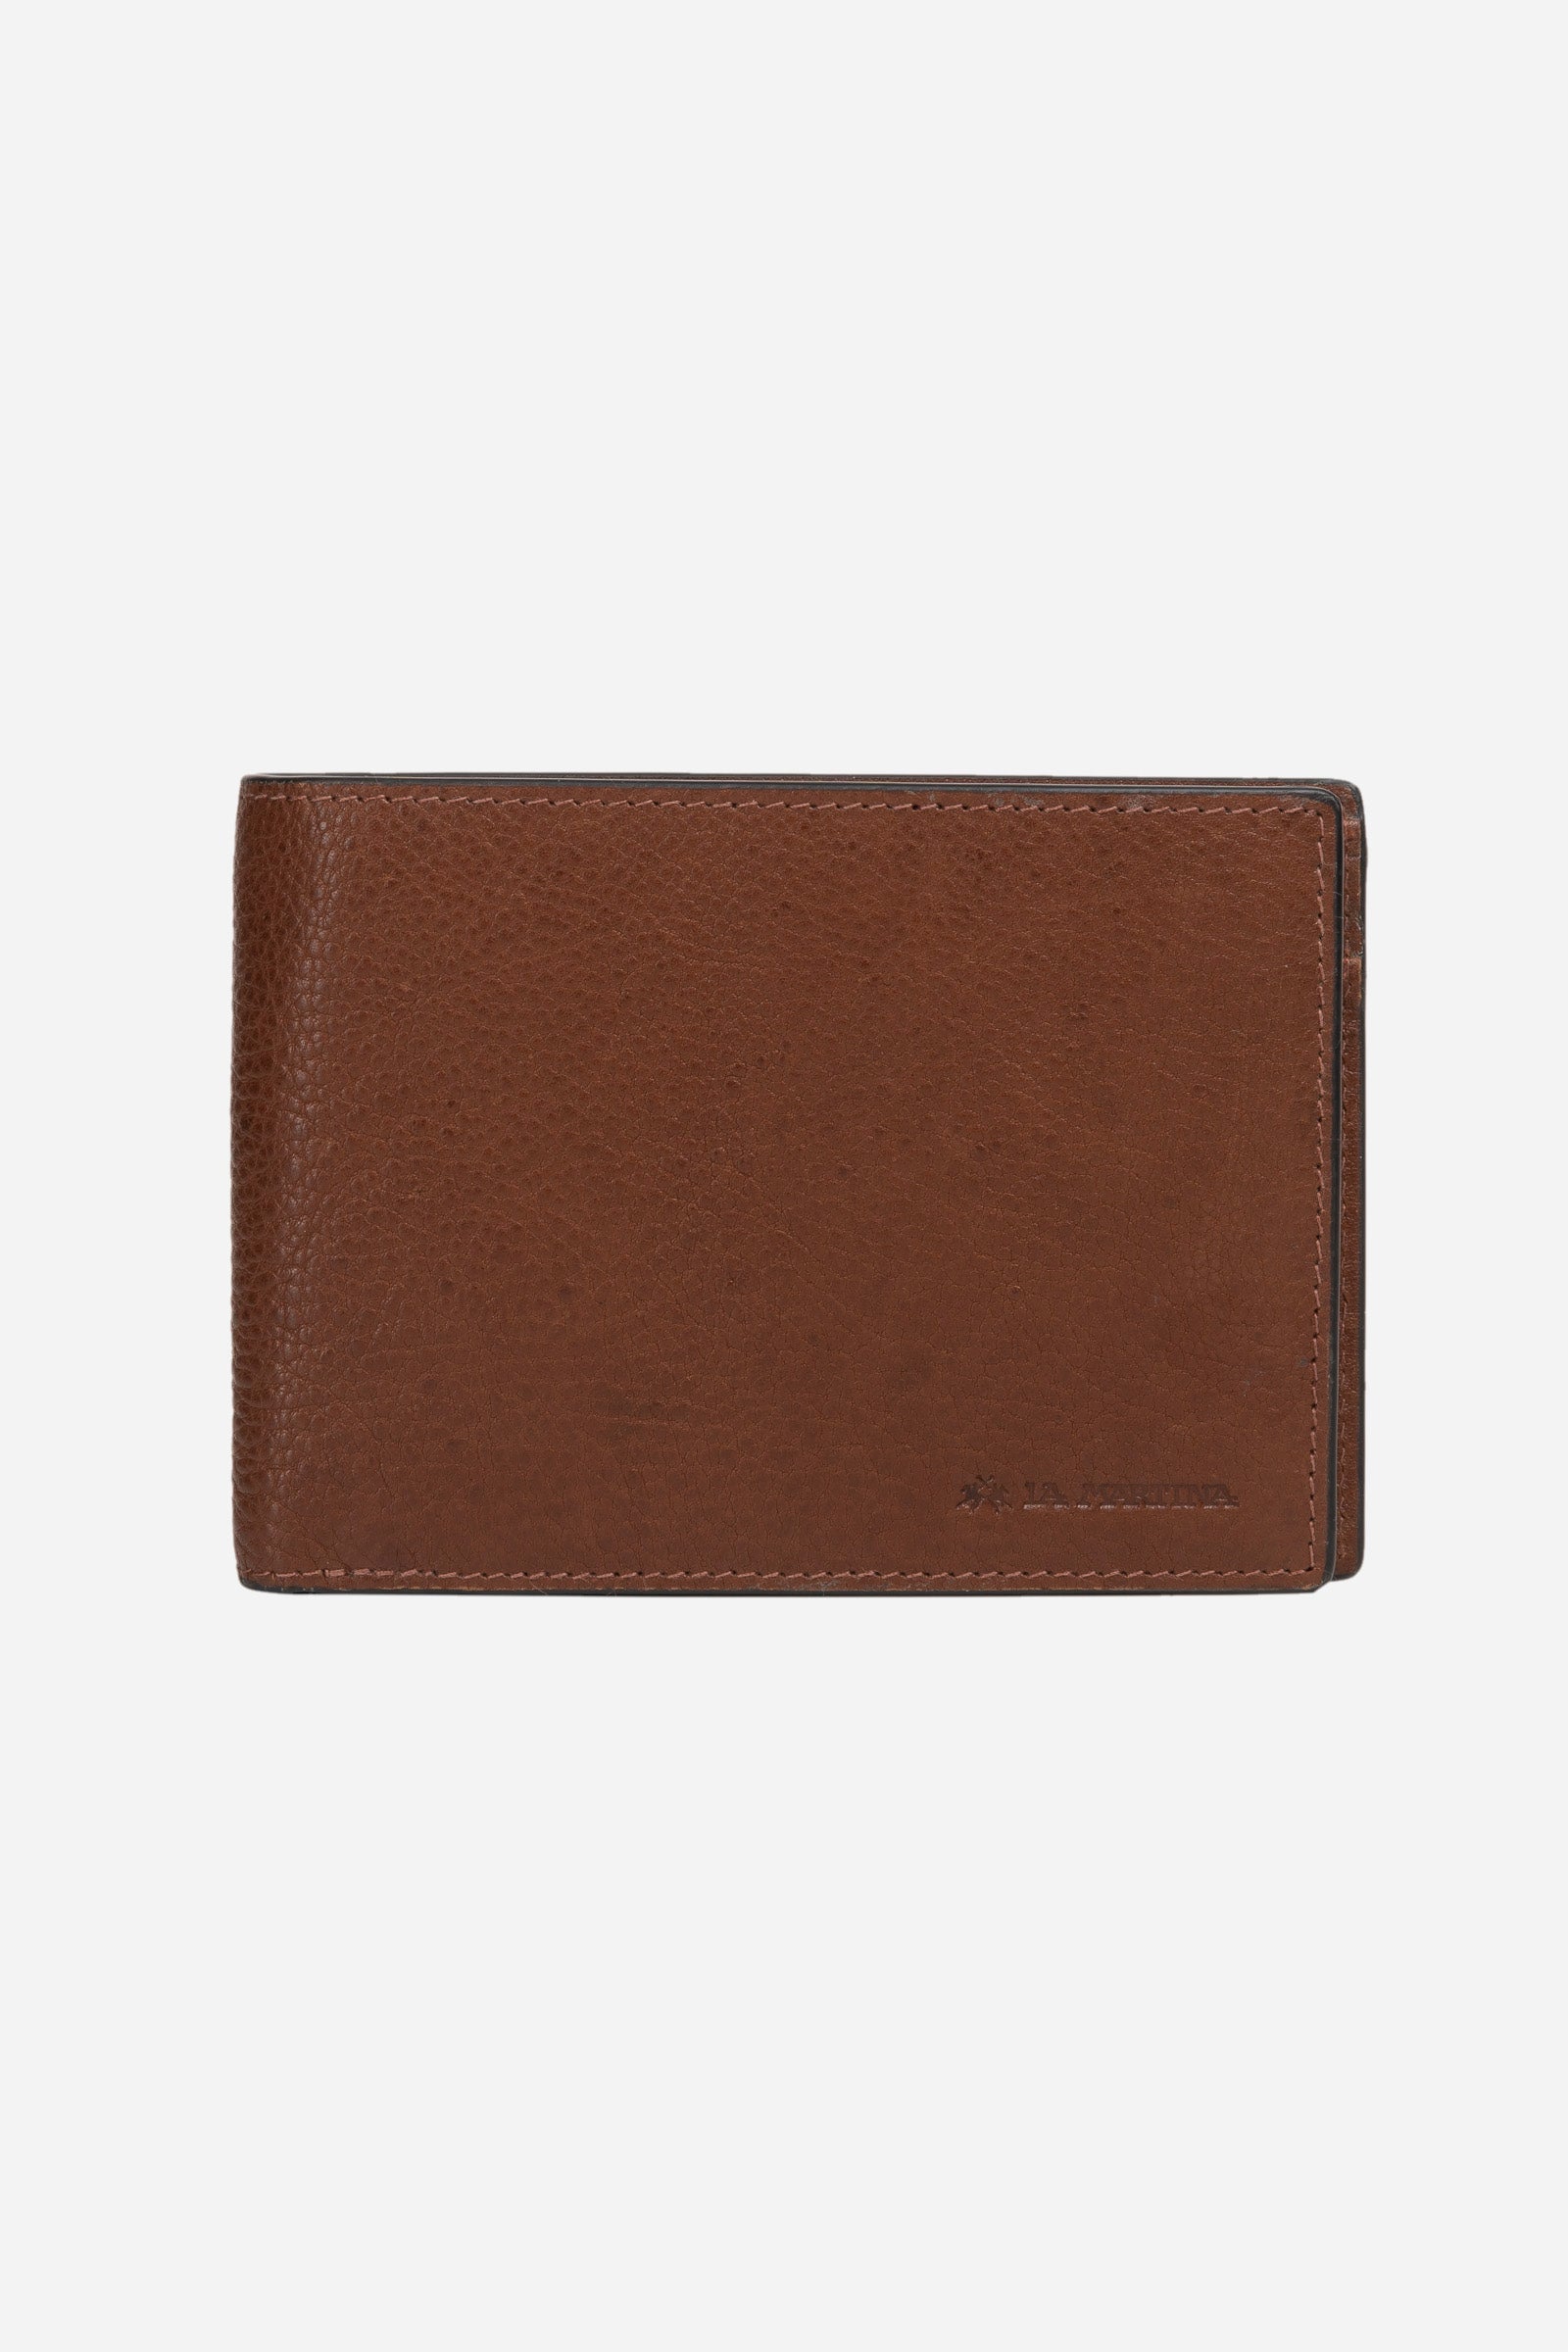 Leather wallet - Paulo